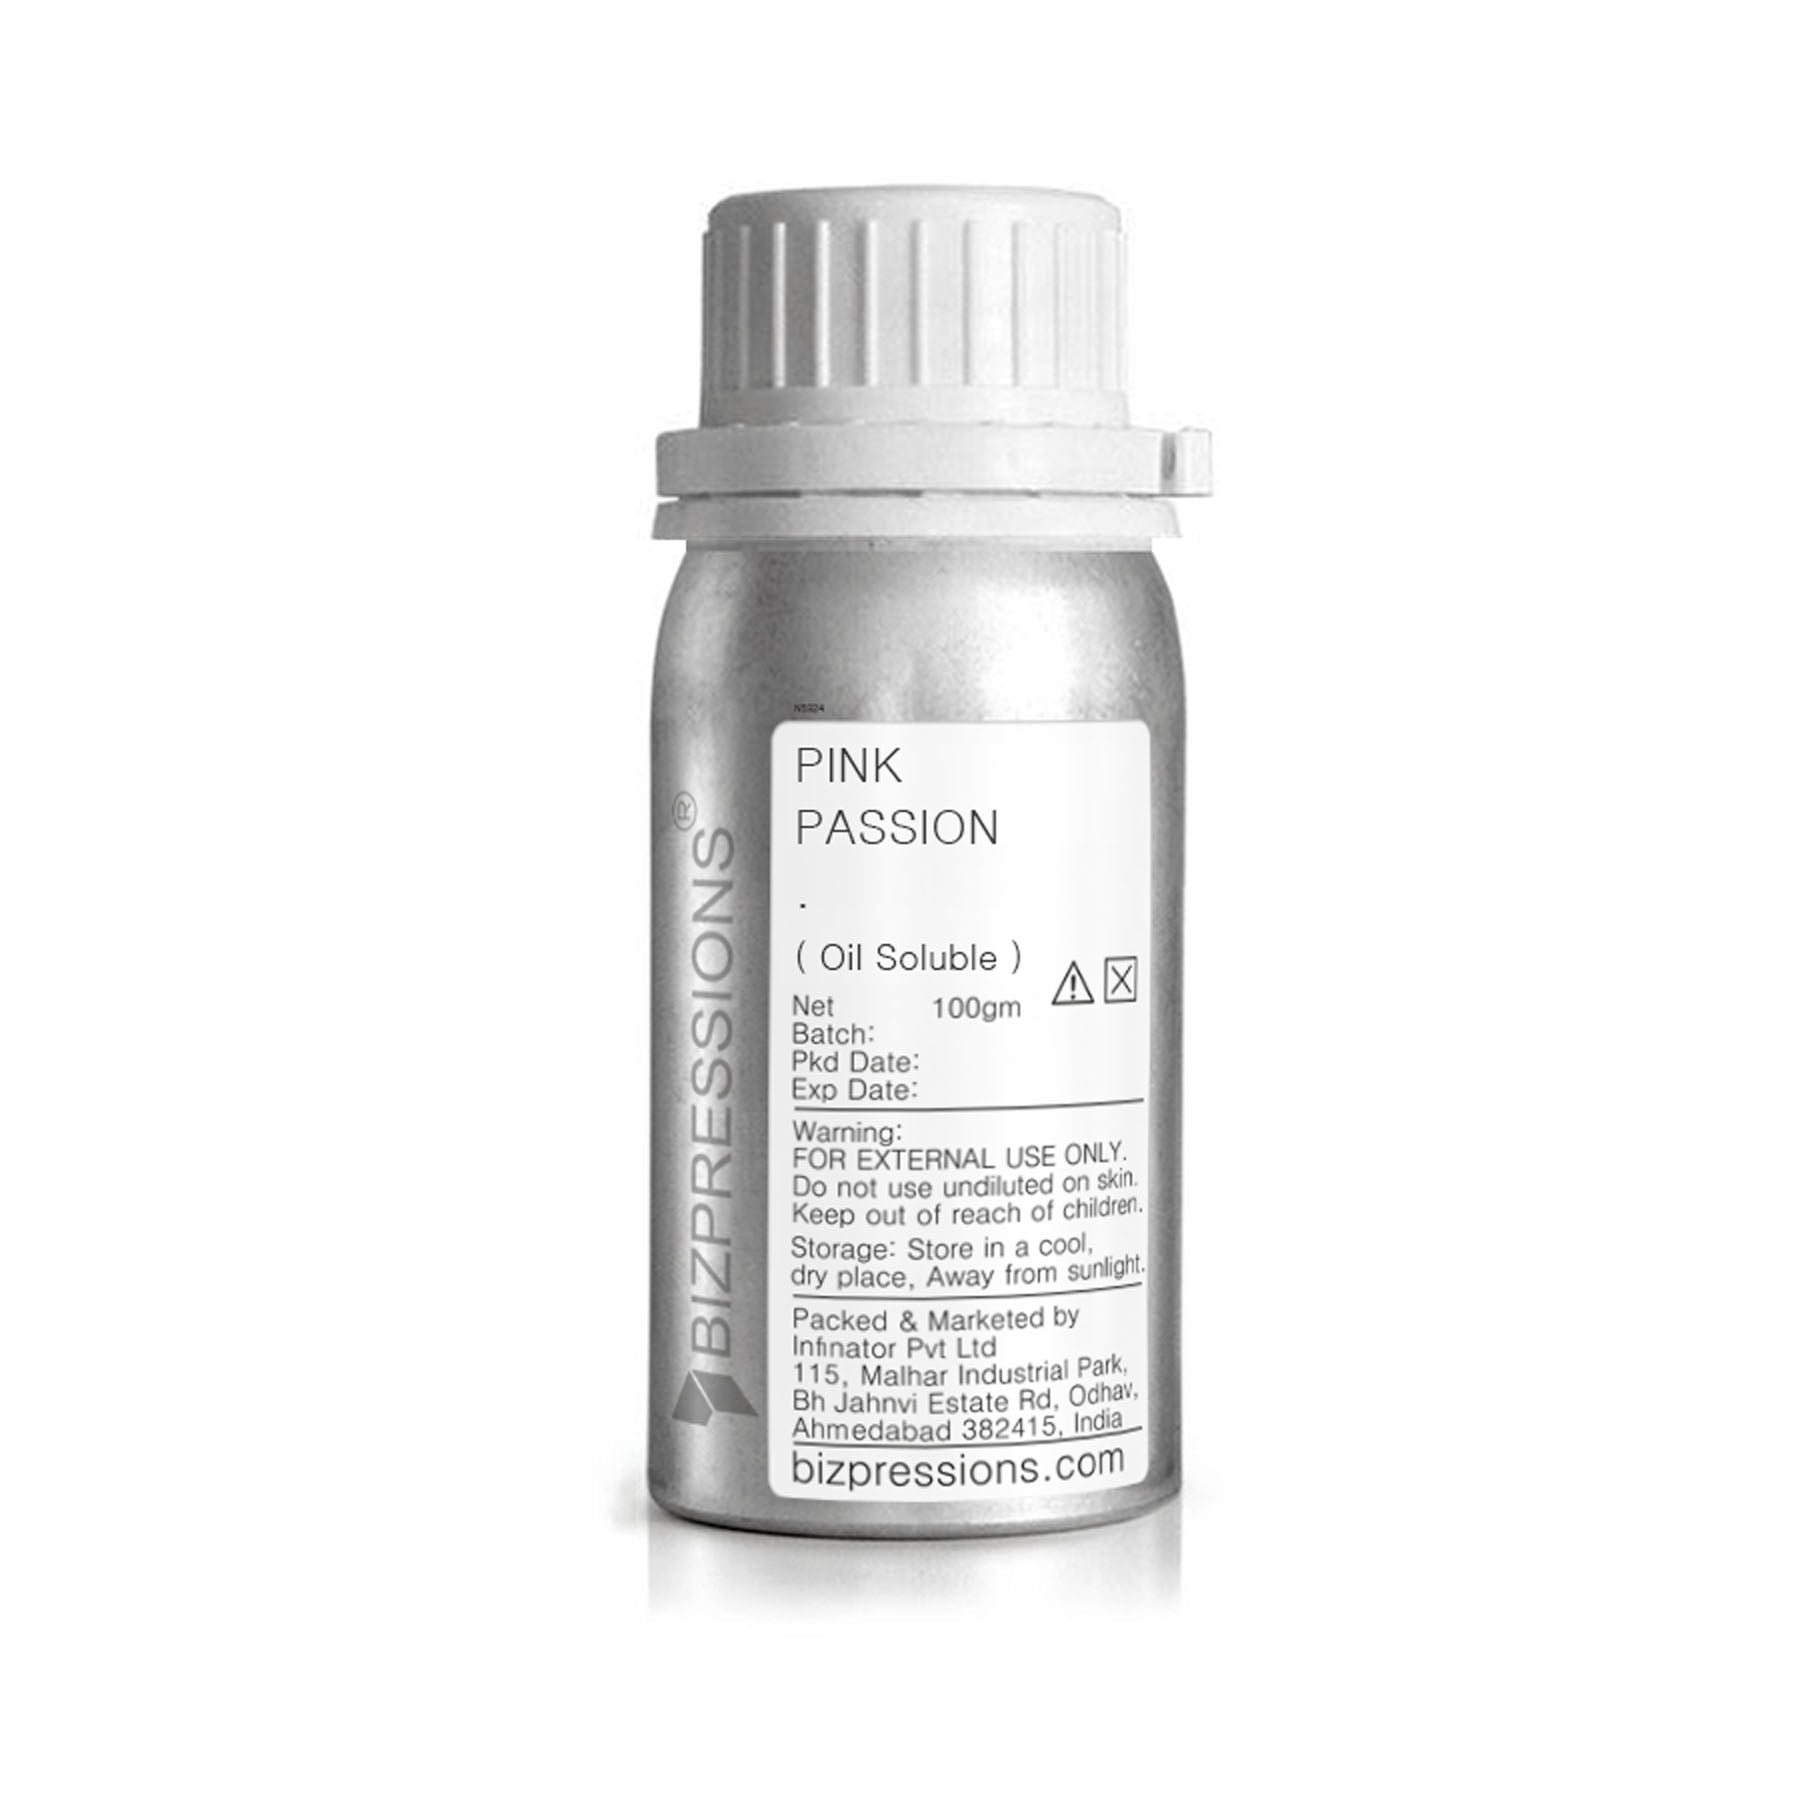 PINK PASSION - Fragrance ( Oil Soluble ) - 100 gm